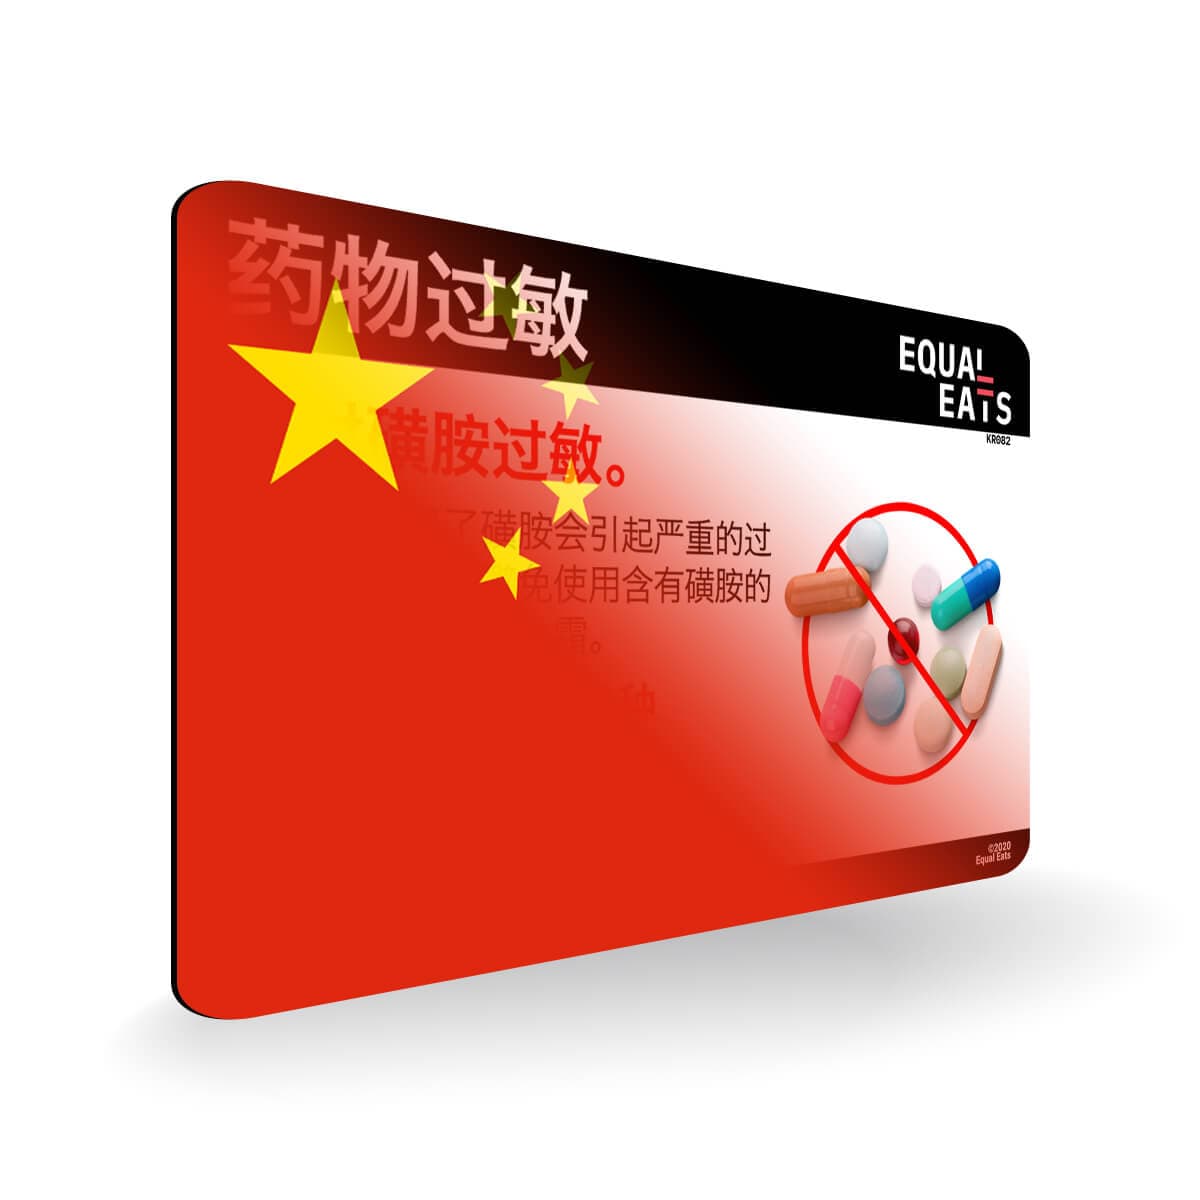 Sulfa Allergy in Simplified Chinese. Sulfa Medicine Allergy Card for China